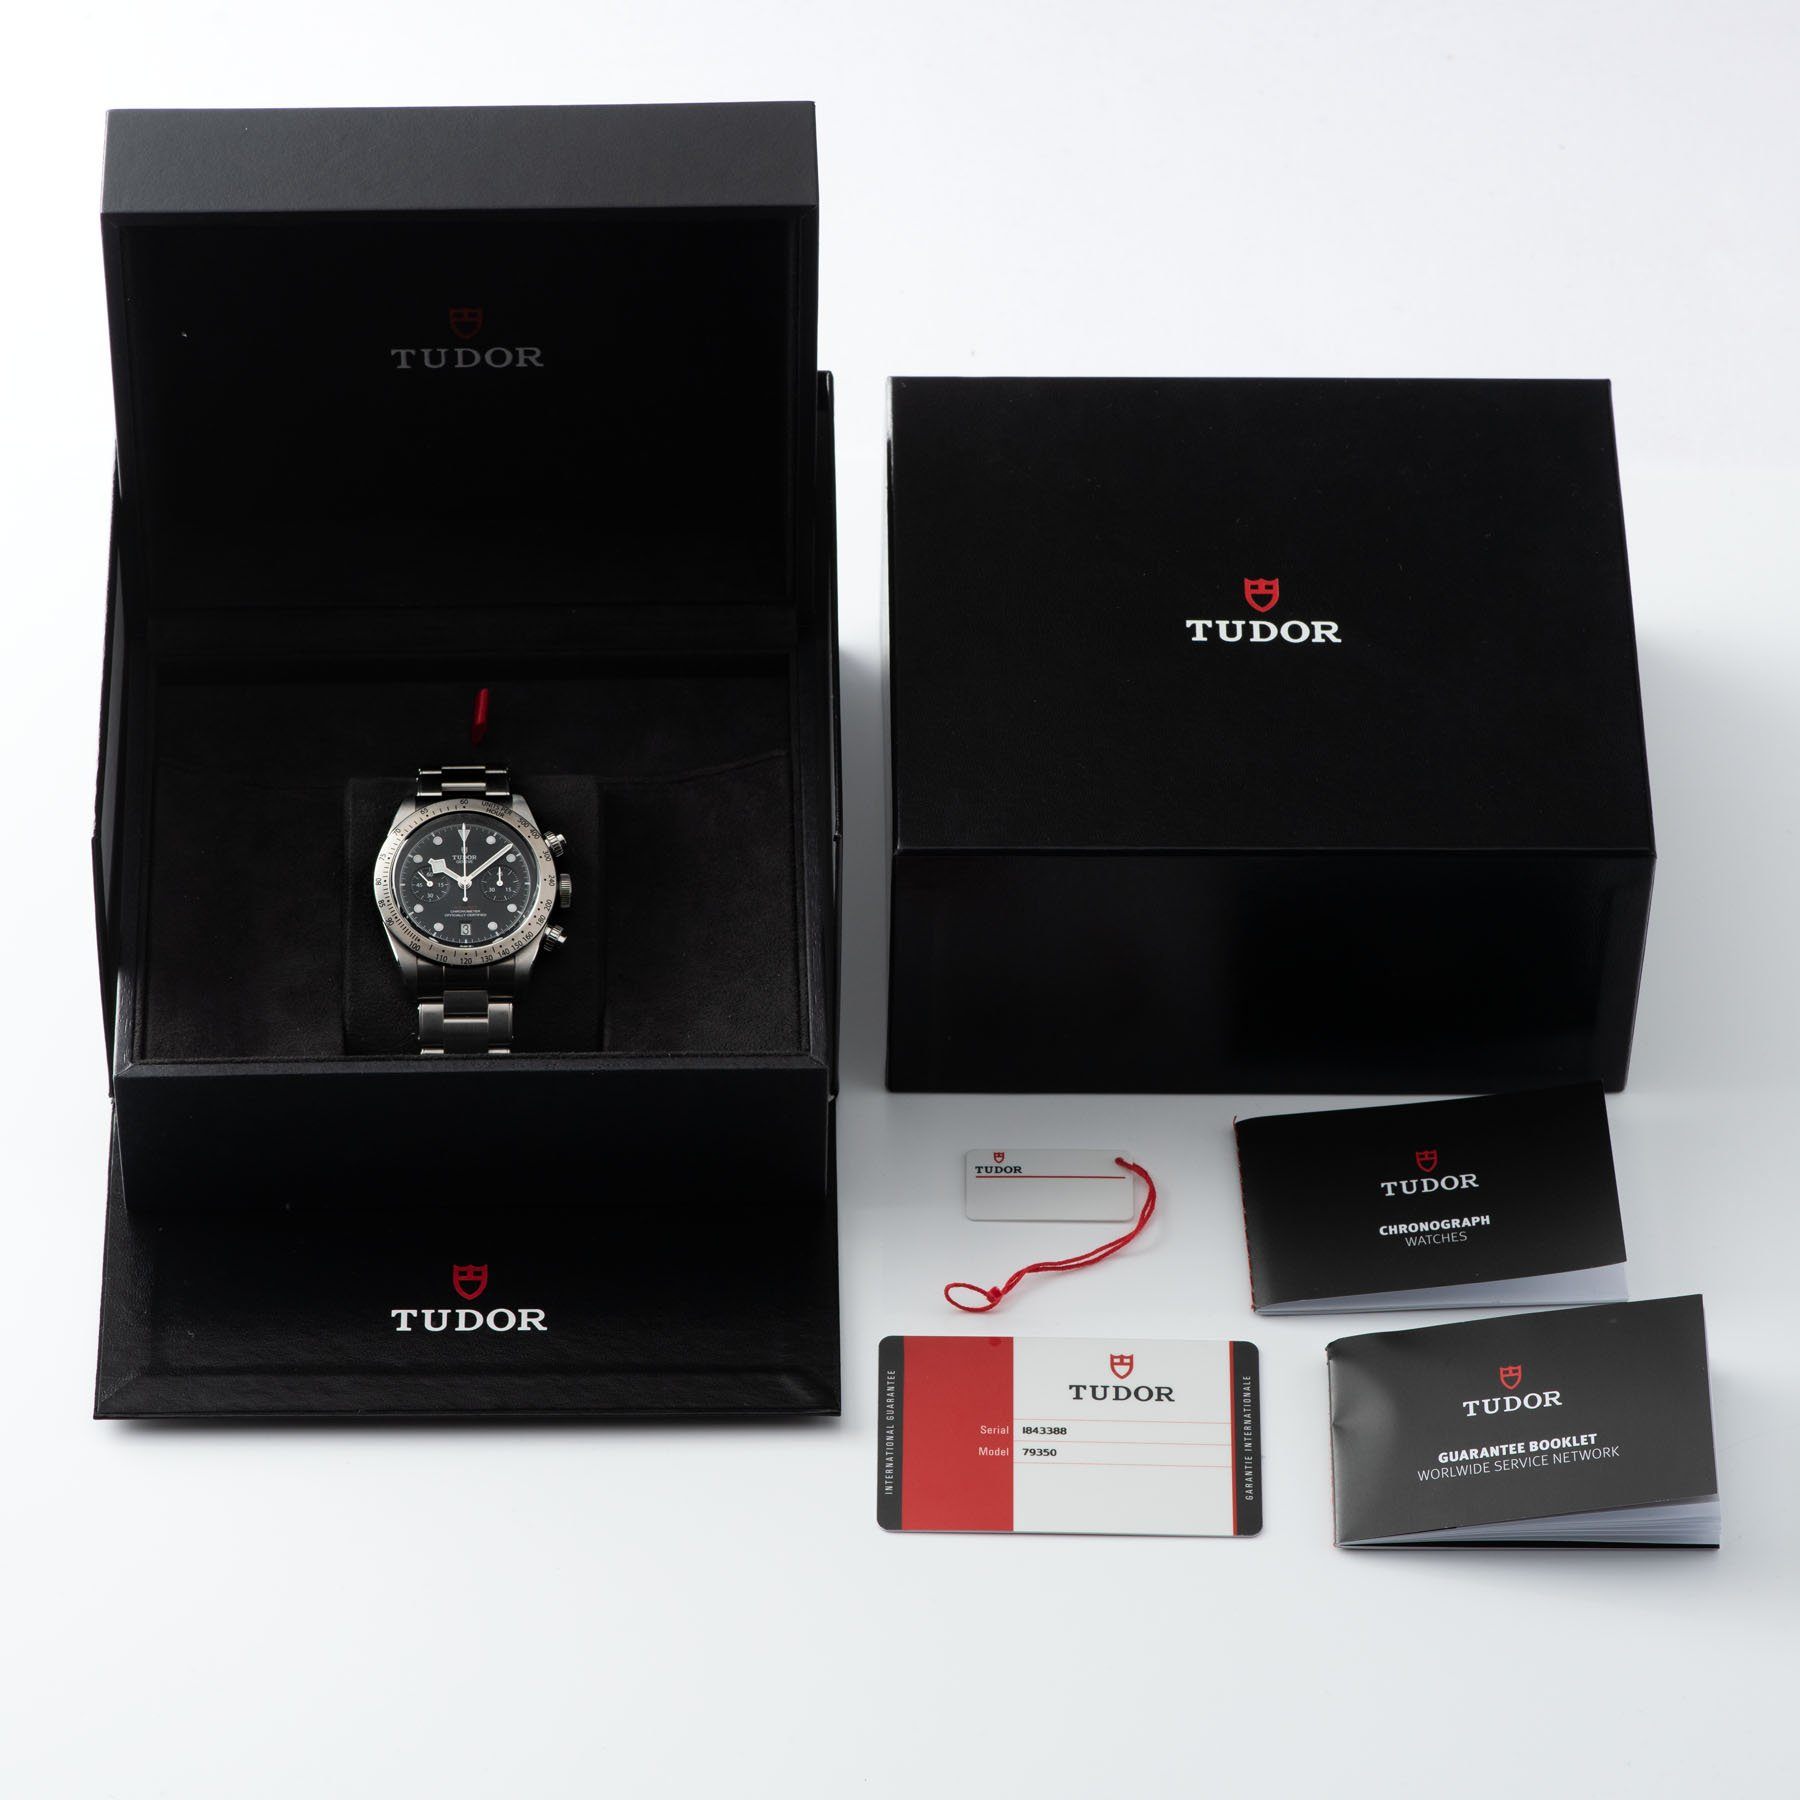 Tudor Black Bay Chronograph Steel Full Set with Boxes, guarantee, booklets and hangtag